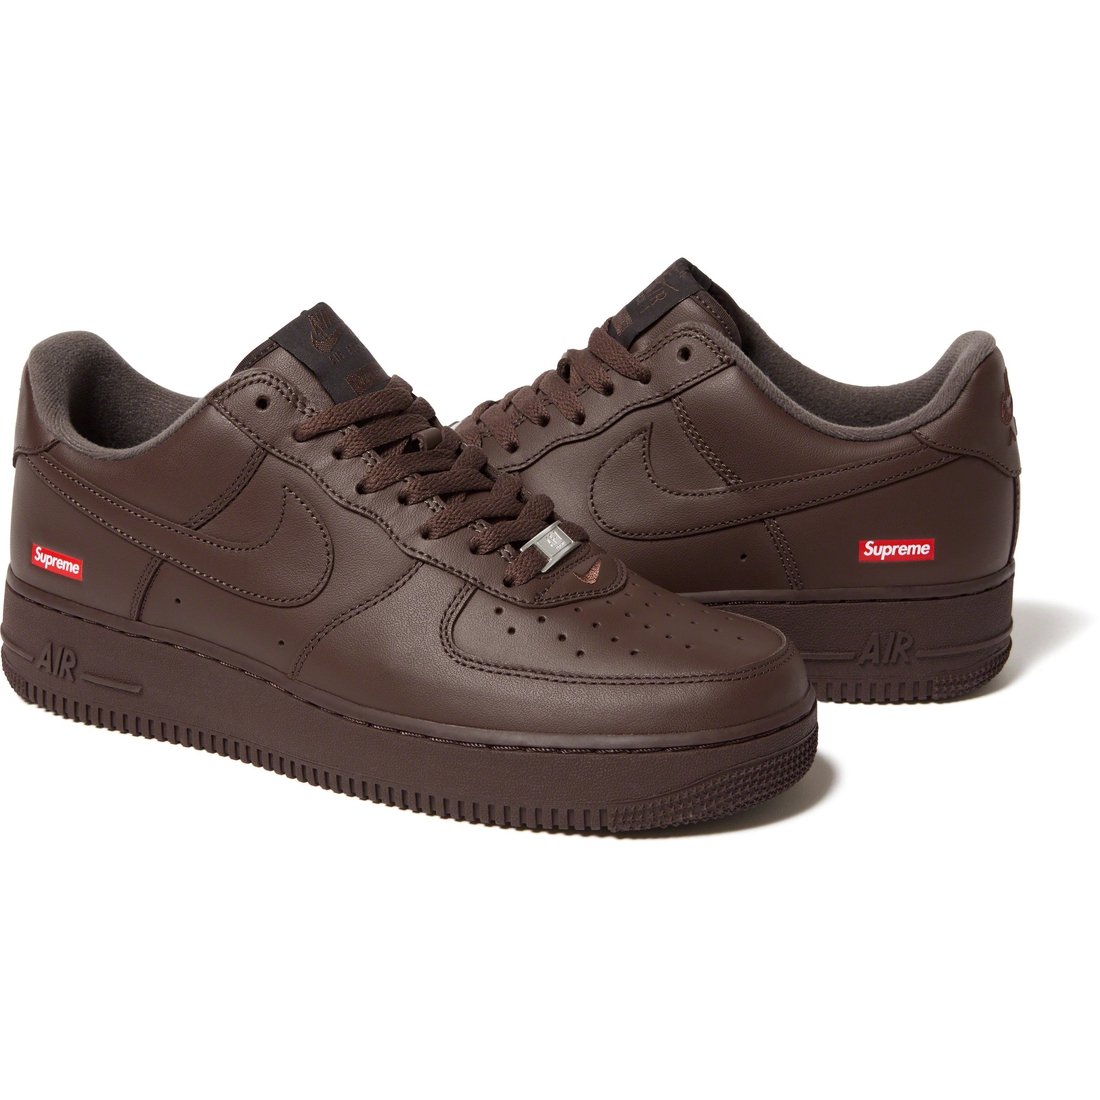 Air forces came in today! : r/Supreme